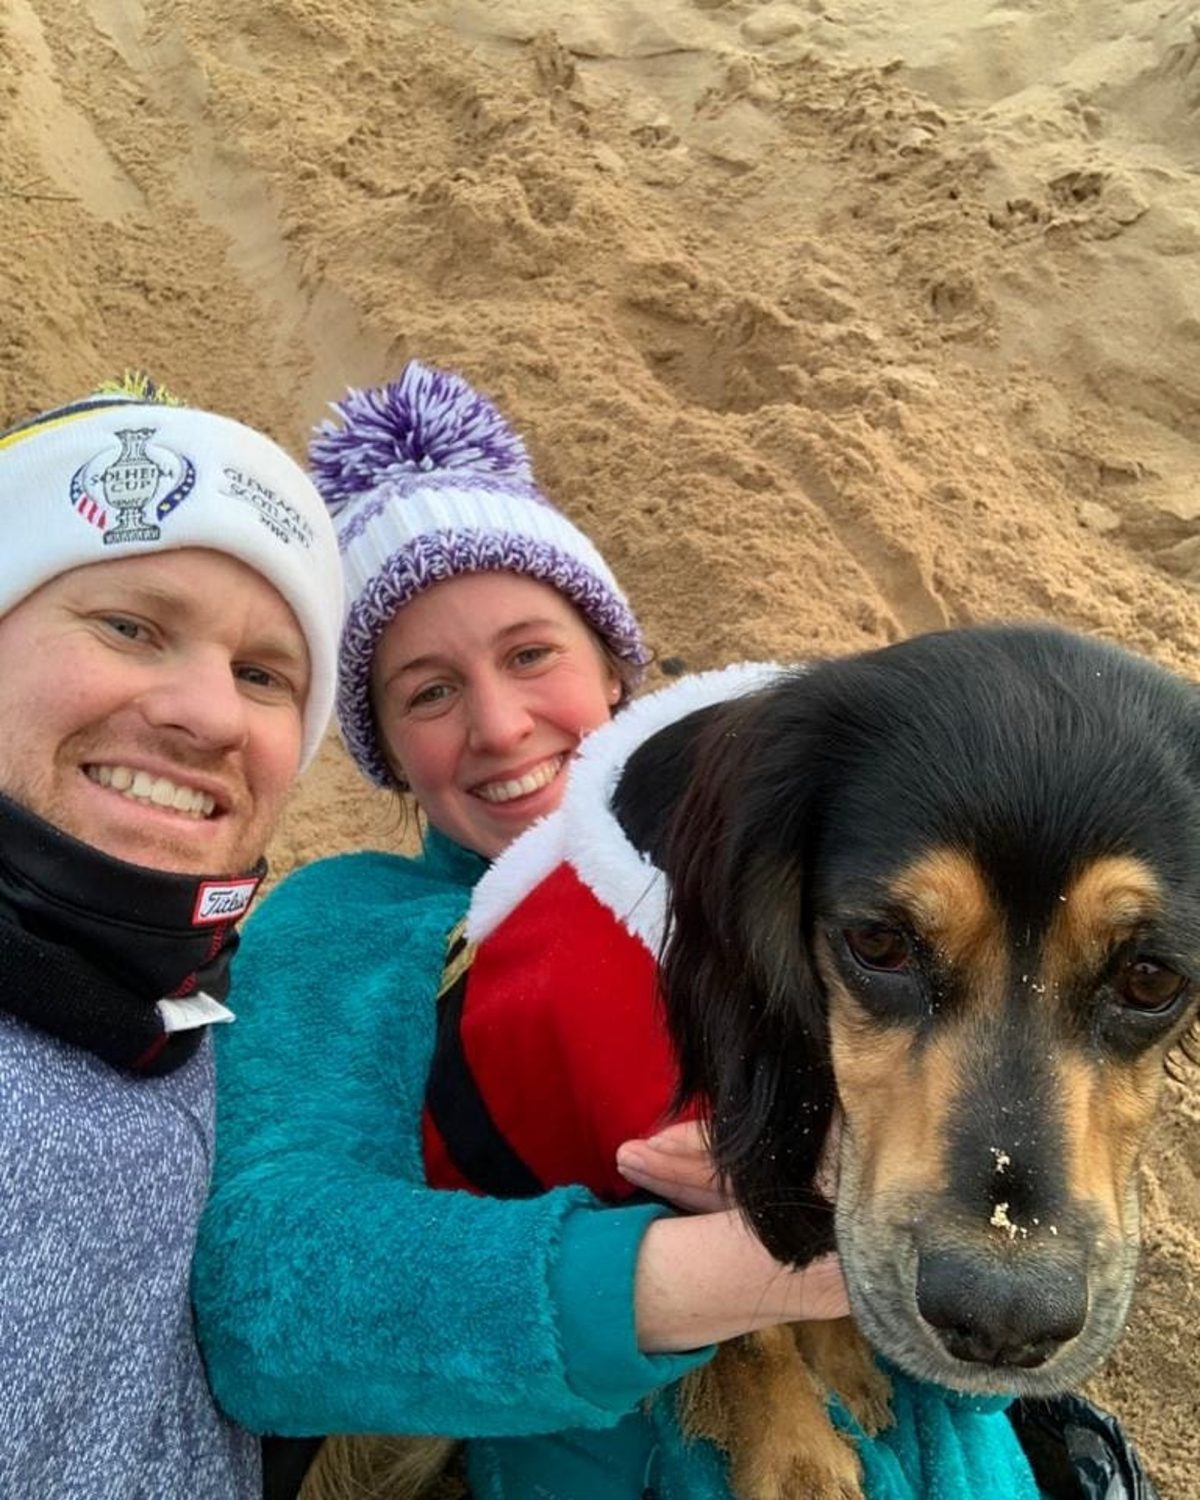 Hannah with her partner Euan and their dog Poppy.